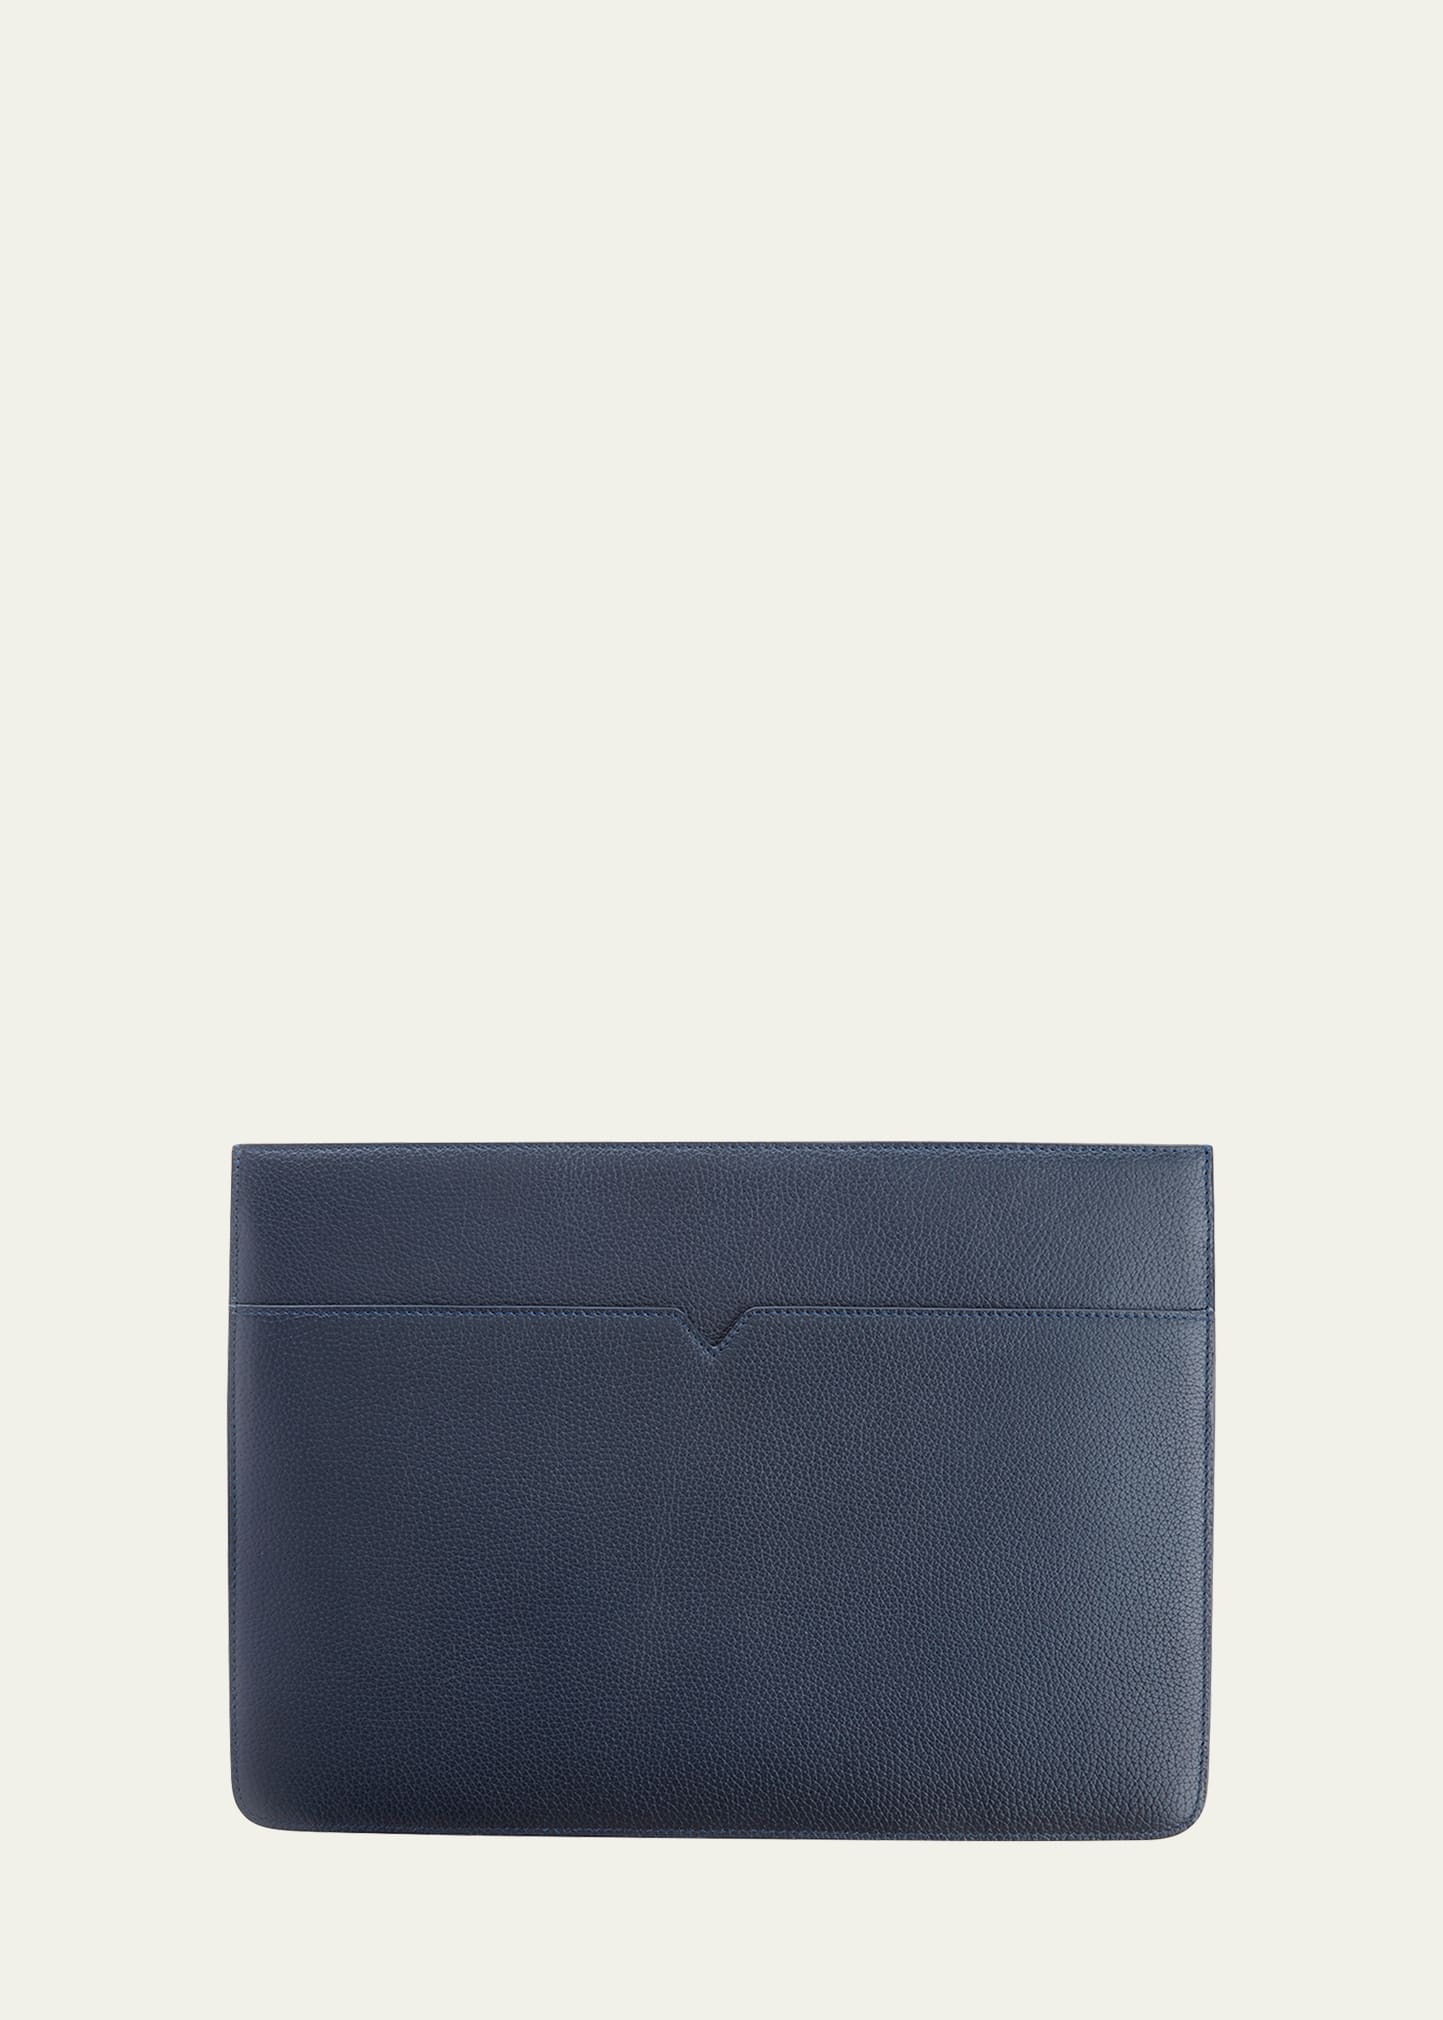 Royce New York Personalized Leather 13" Laptop Sleeve In Navy Blue